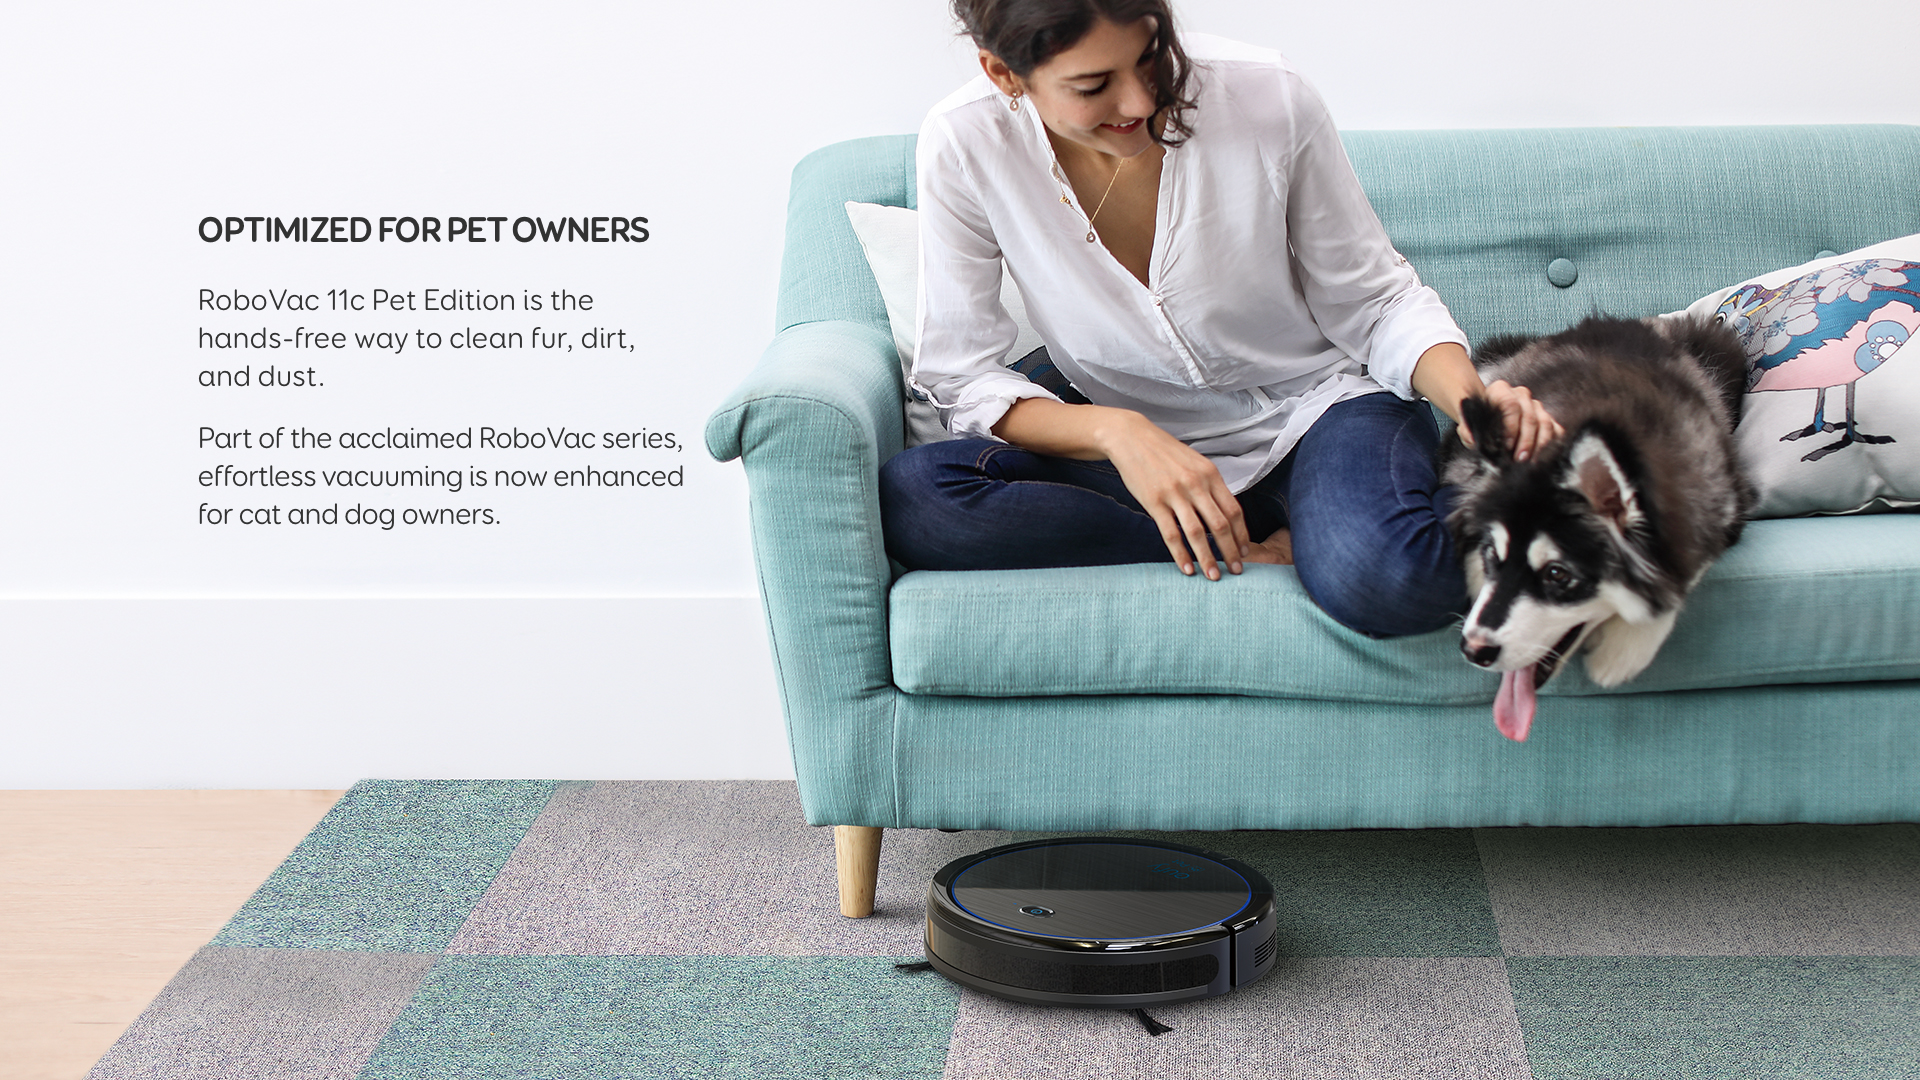 Anker eufy RoboVac 11c Pet Edition Wi-Fi Connected Robot Vacuum - image 3 of 9